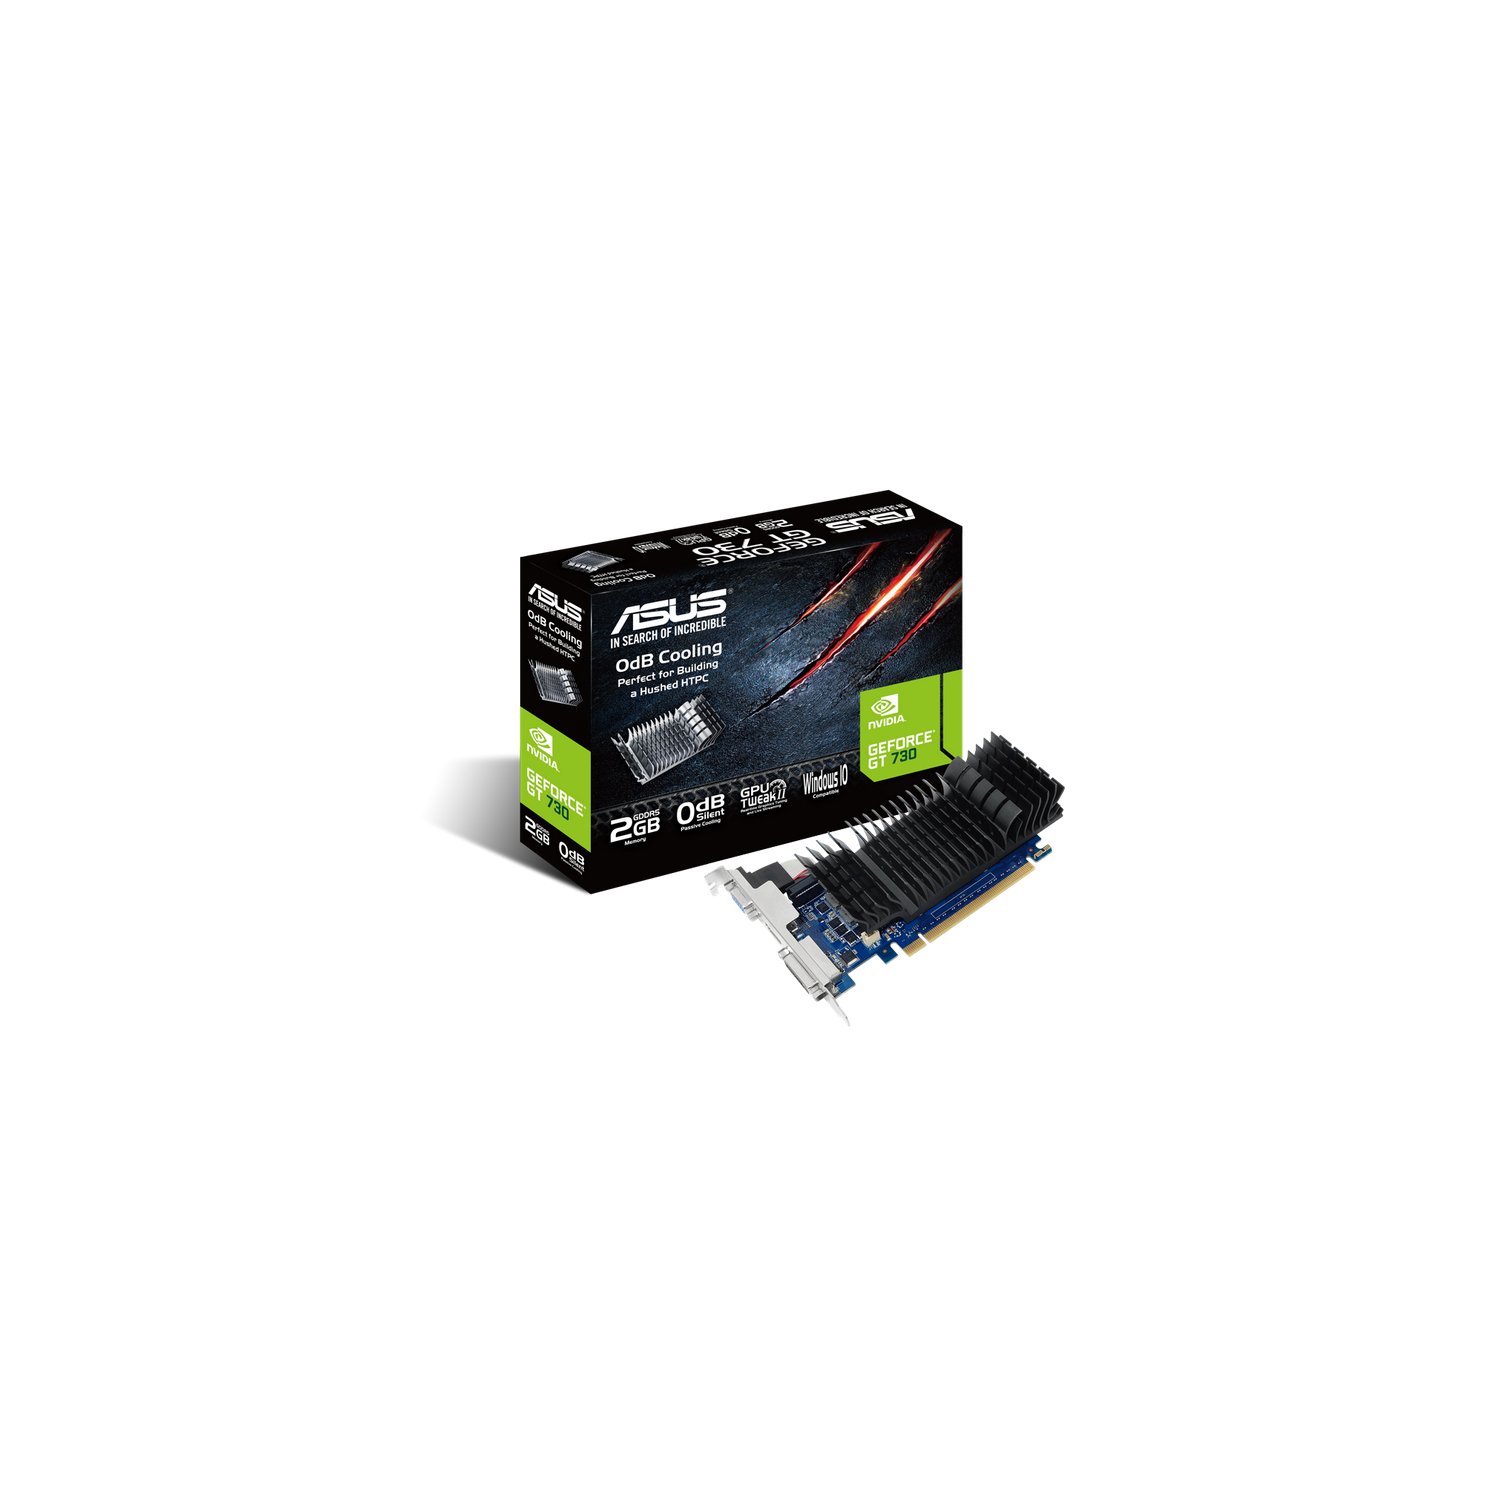 ASUS GeForce GT 730 2GB GDDR5 PCI Express 2.0 Low Profile Video Card for Silent HTPC Builds (with I/O Port Brackets)